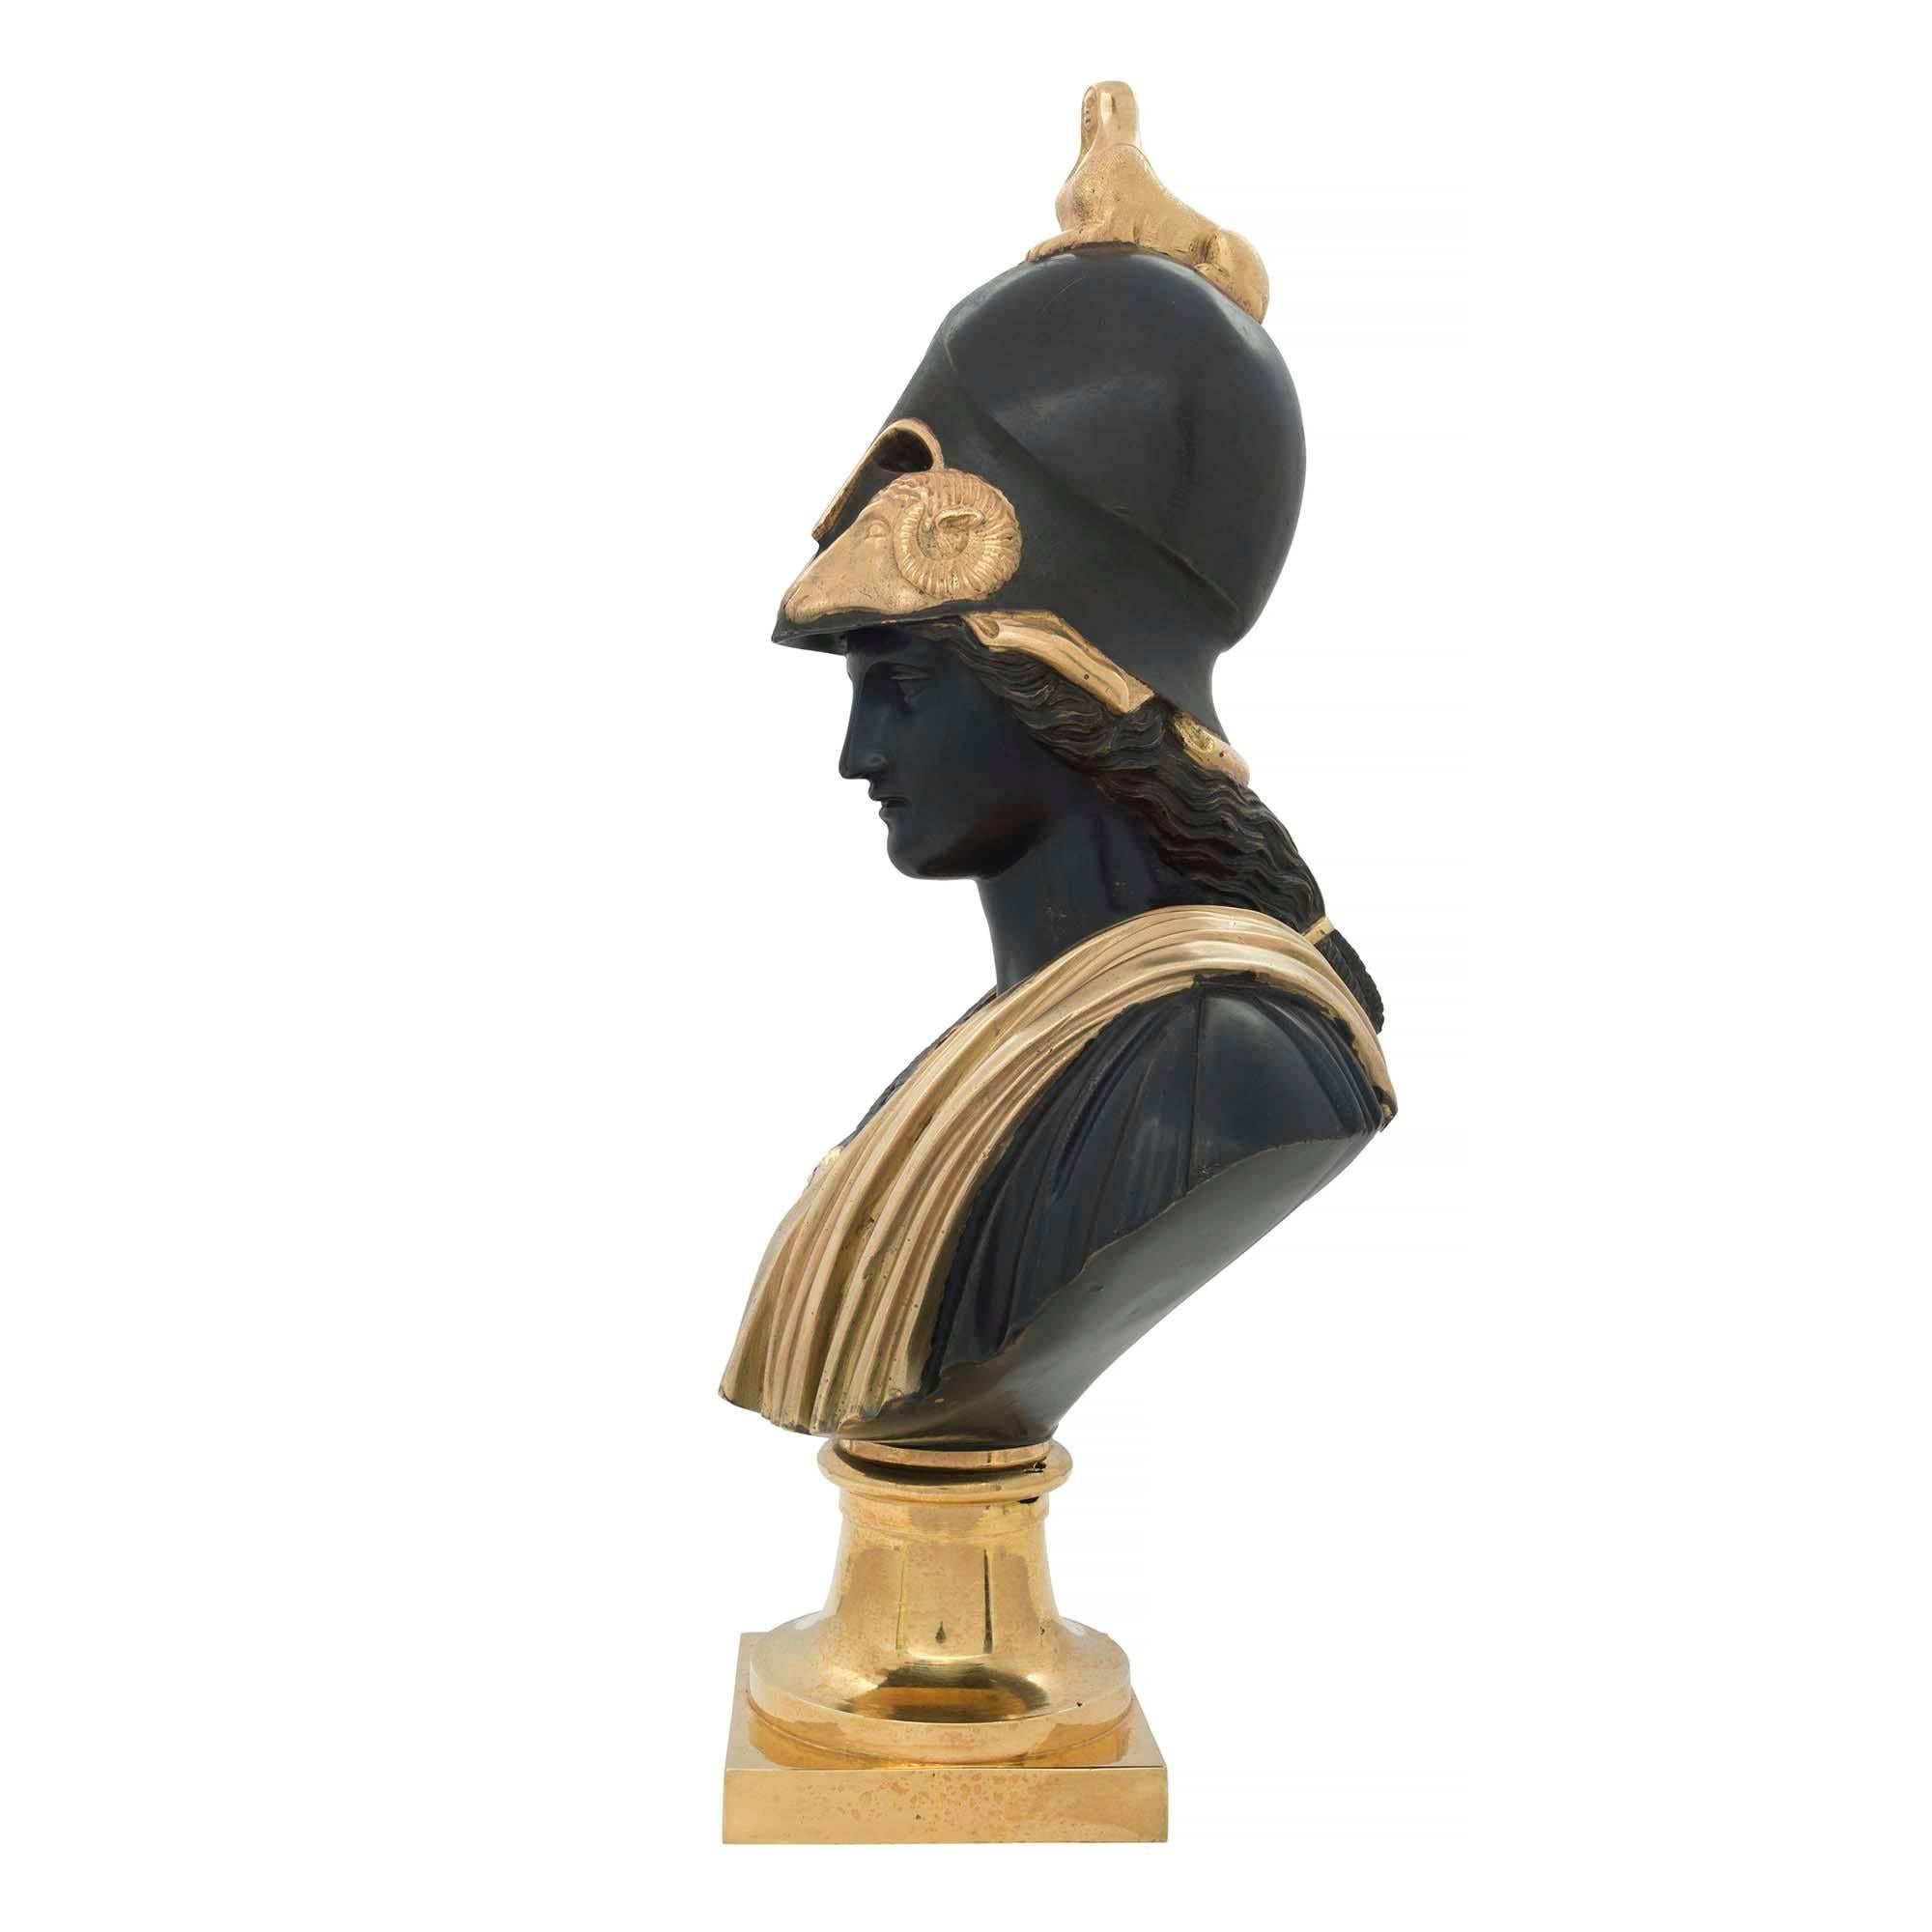 A striking French 19th century Louis XVI style patinated and ormolu bust of Pericles. The bust is raised by a square ormolu base below the socle. Pericles is dressed in his formal armor with a draped wrap on his shoulder. The young Pericles is also